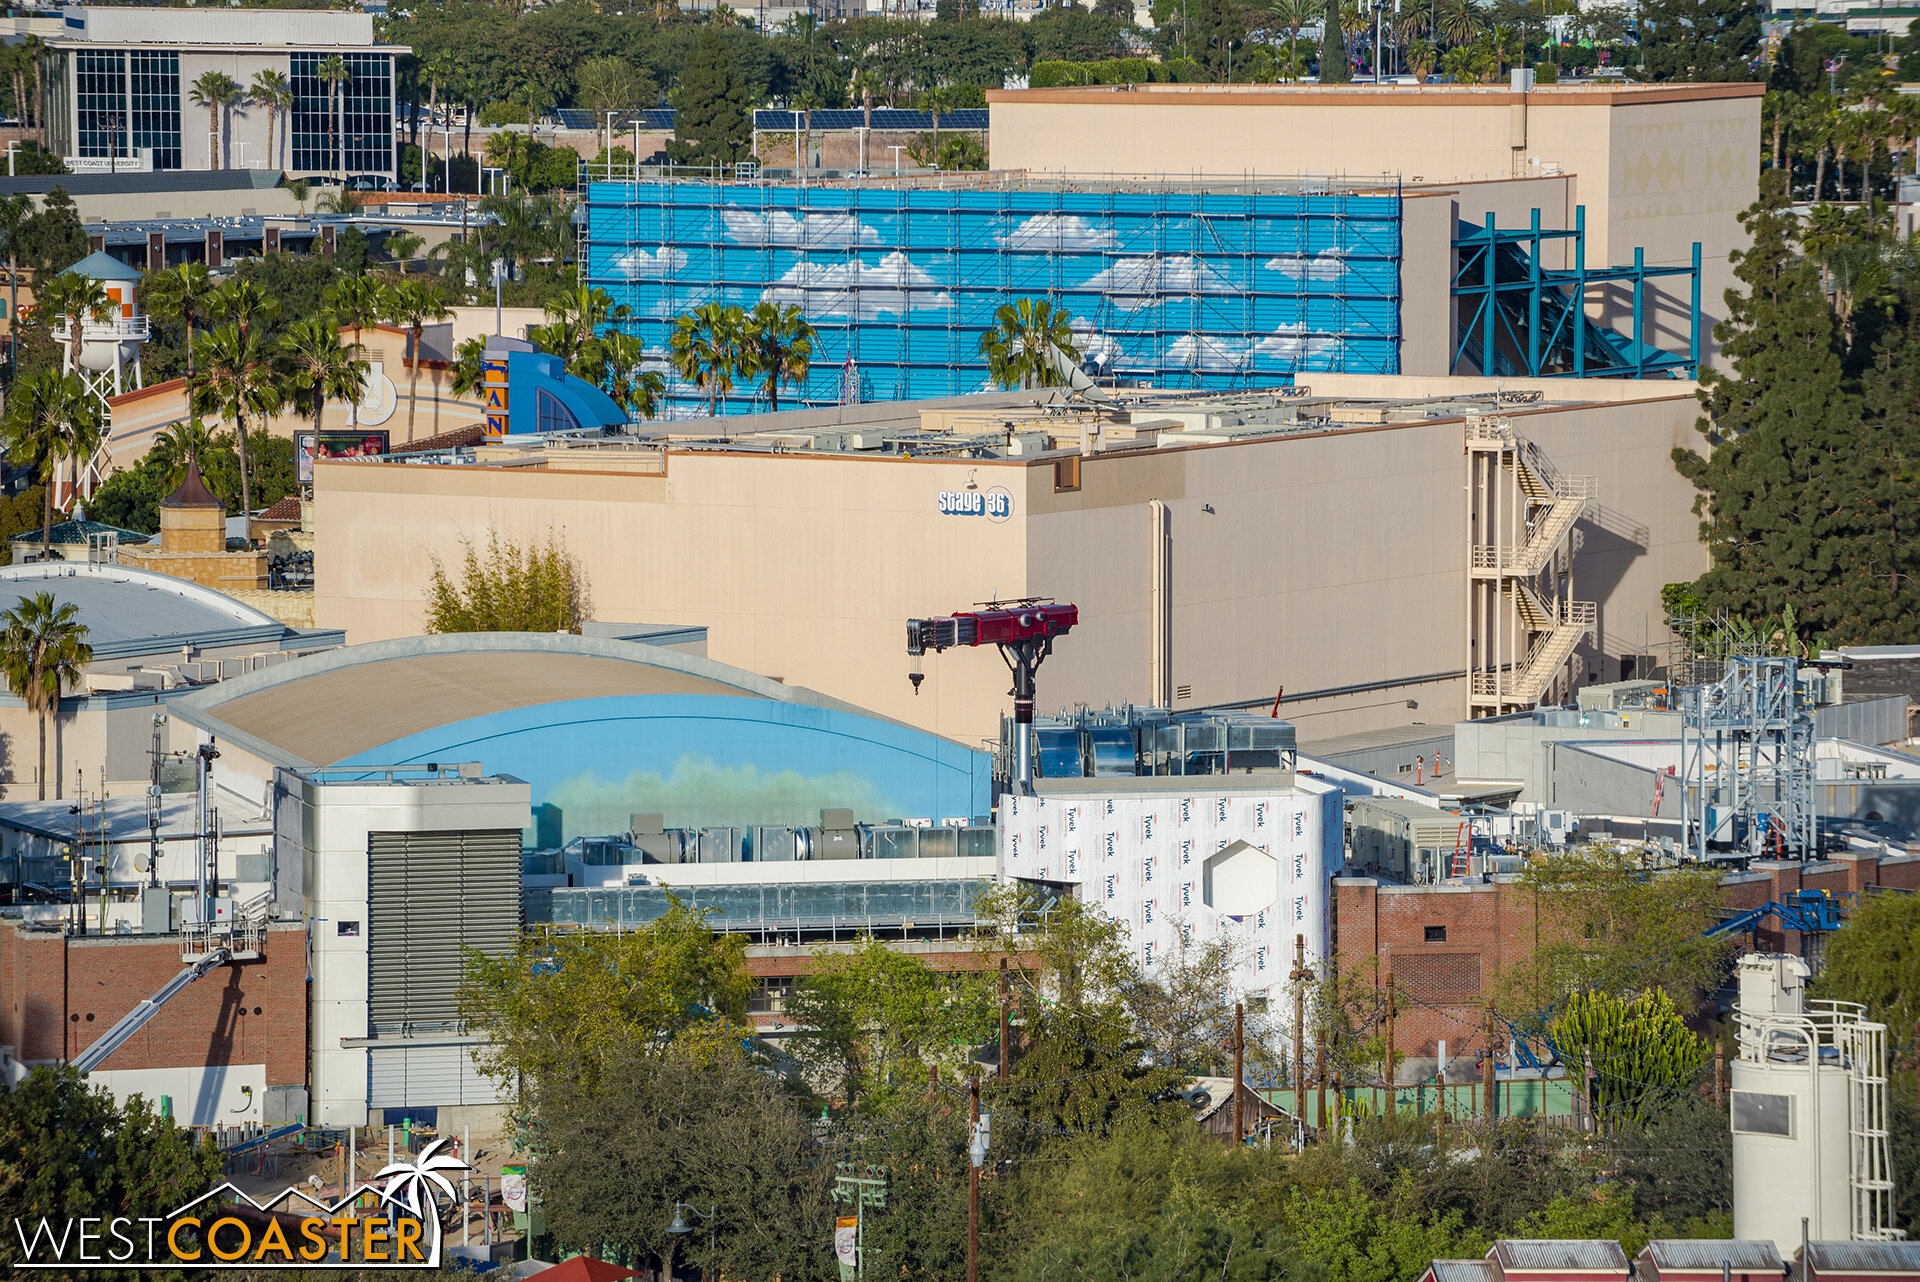  Here’s a better overview of the Spider-Man ride building. 